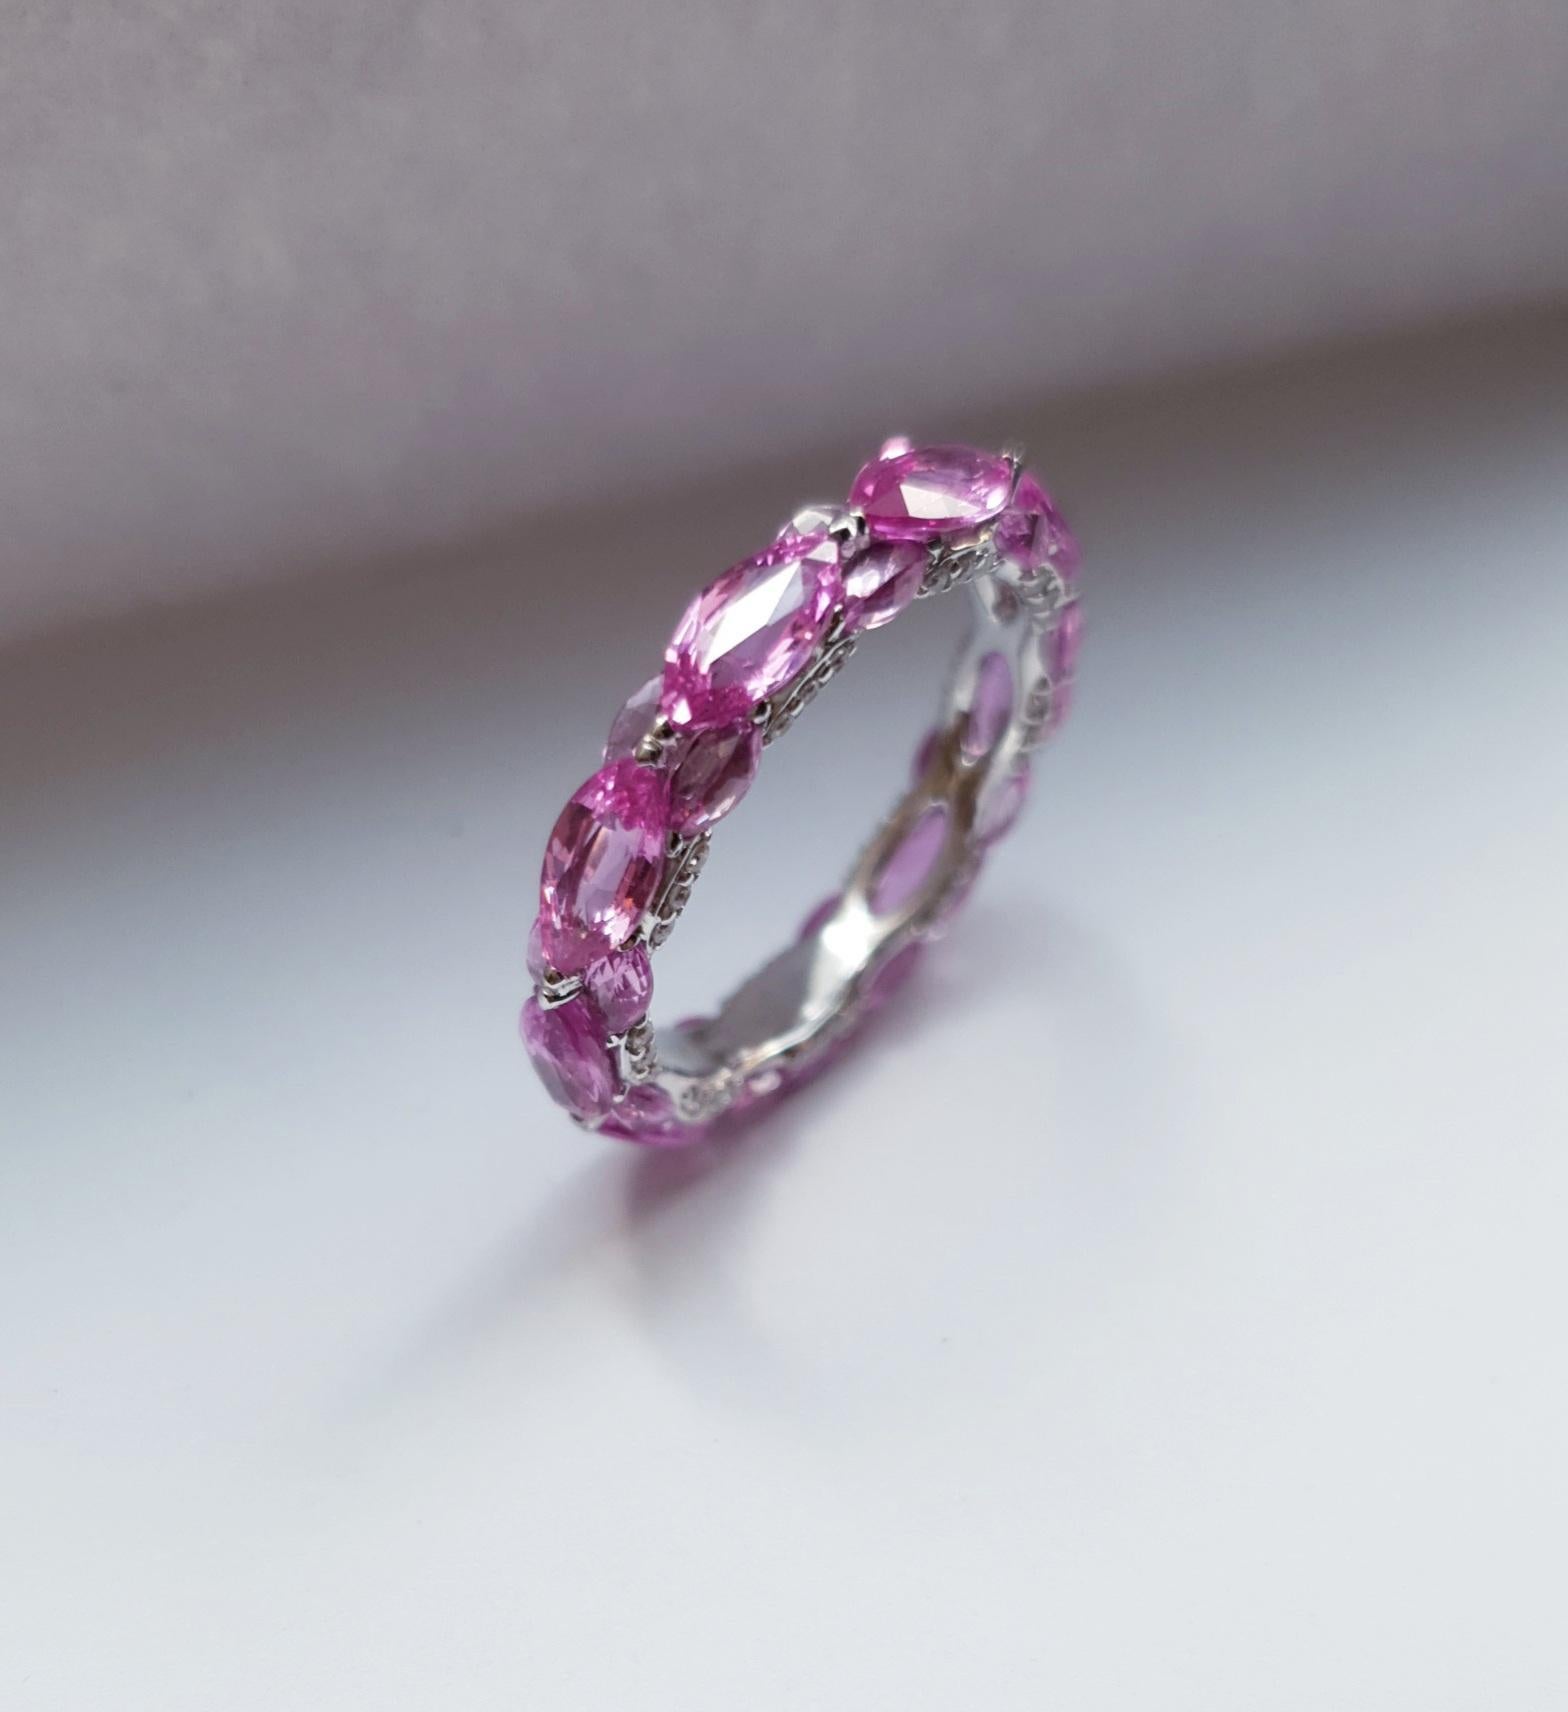 The Pink colour is forever tender, 
Slightly carefree, yet true and slender.
Pure and kind, without a blemish,
Innocent, yet from the heart, it's near.
Viktor Moisiekin

MOISEIKIN's elegant eternity ring from Harmony Collection fascinates your eyes